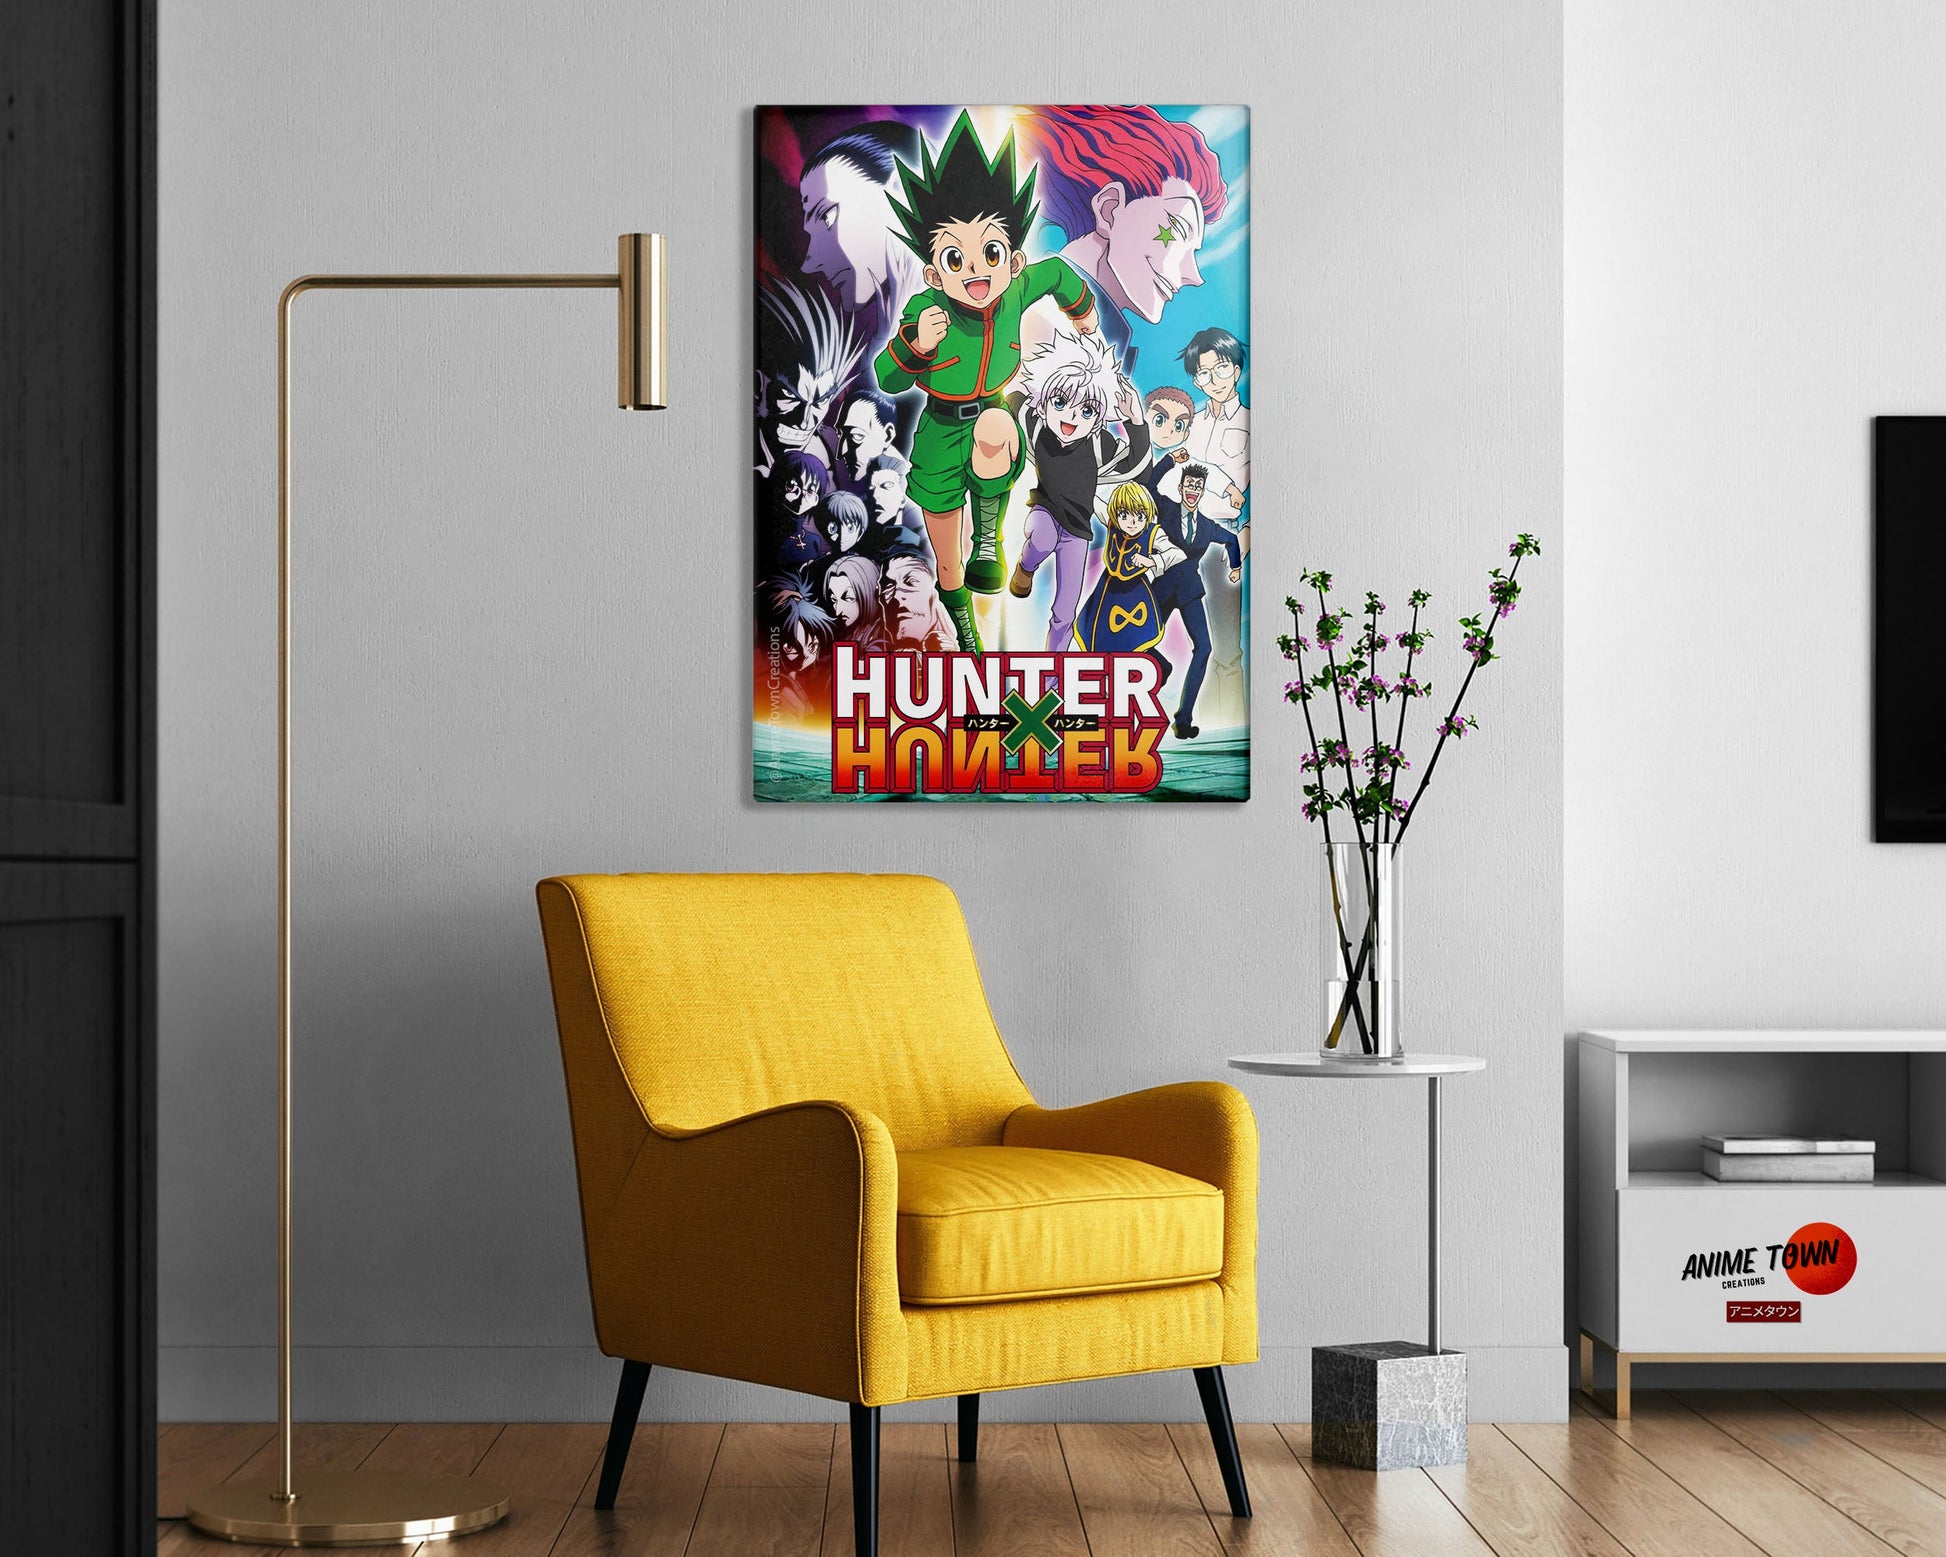 Anime Town Creations Metal Poster Hunter x Hunter Cover 16" x 24" Home Goods - Anime Hunter x Hunter Metal Poster